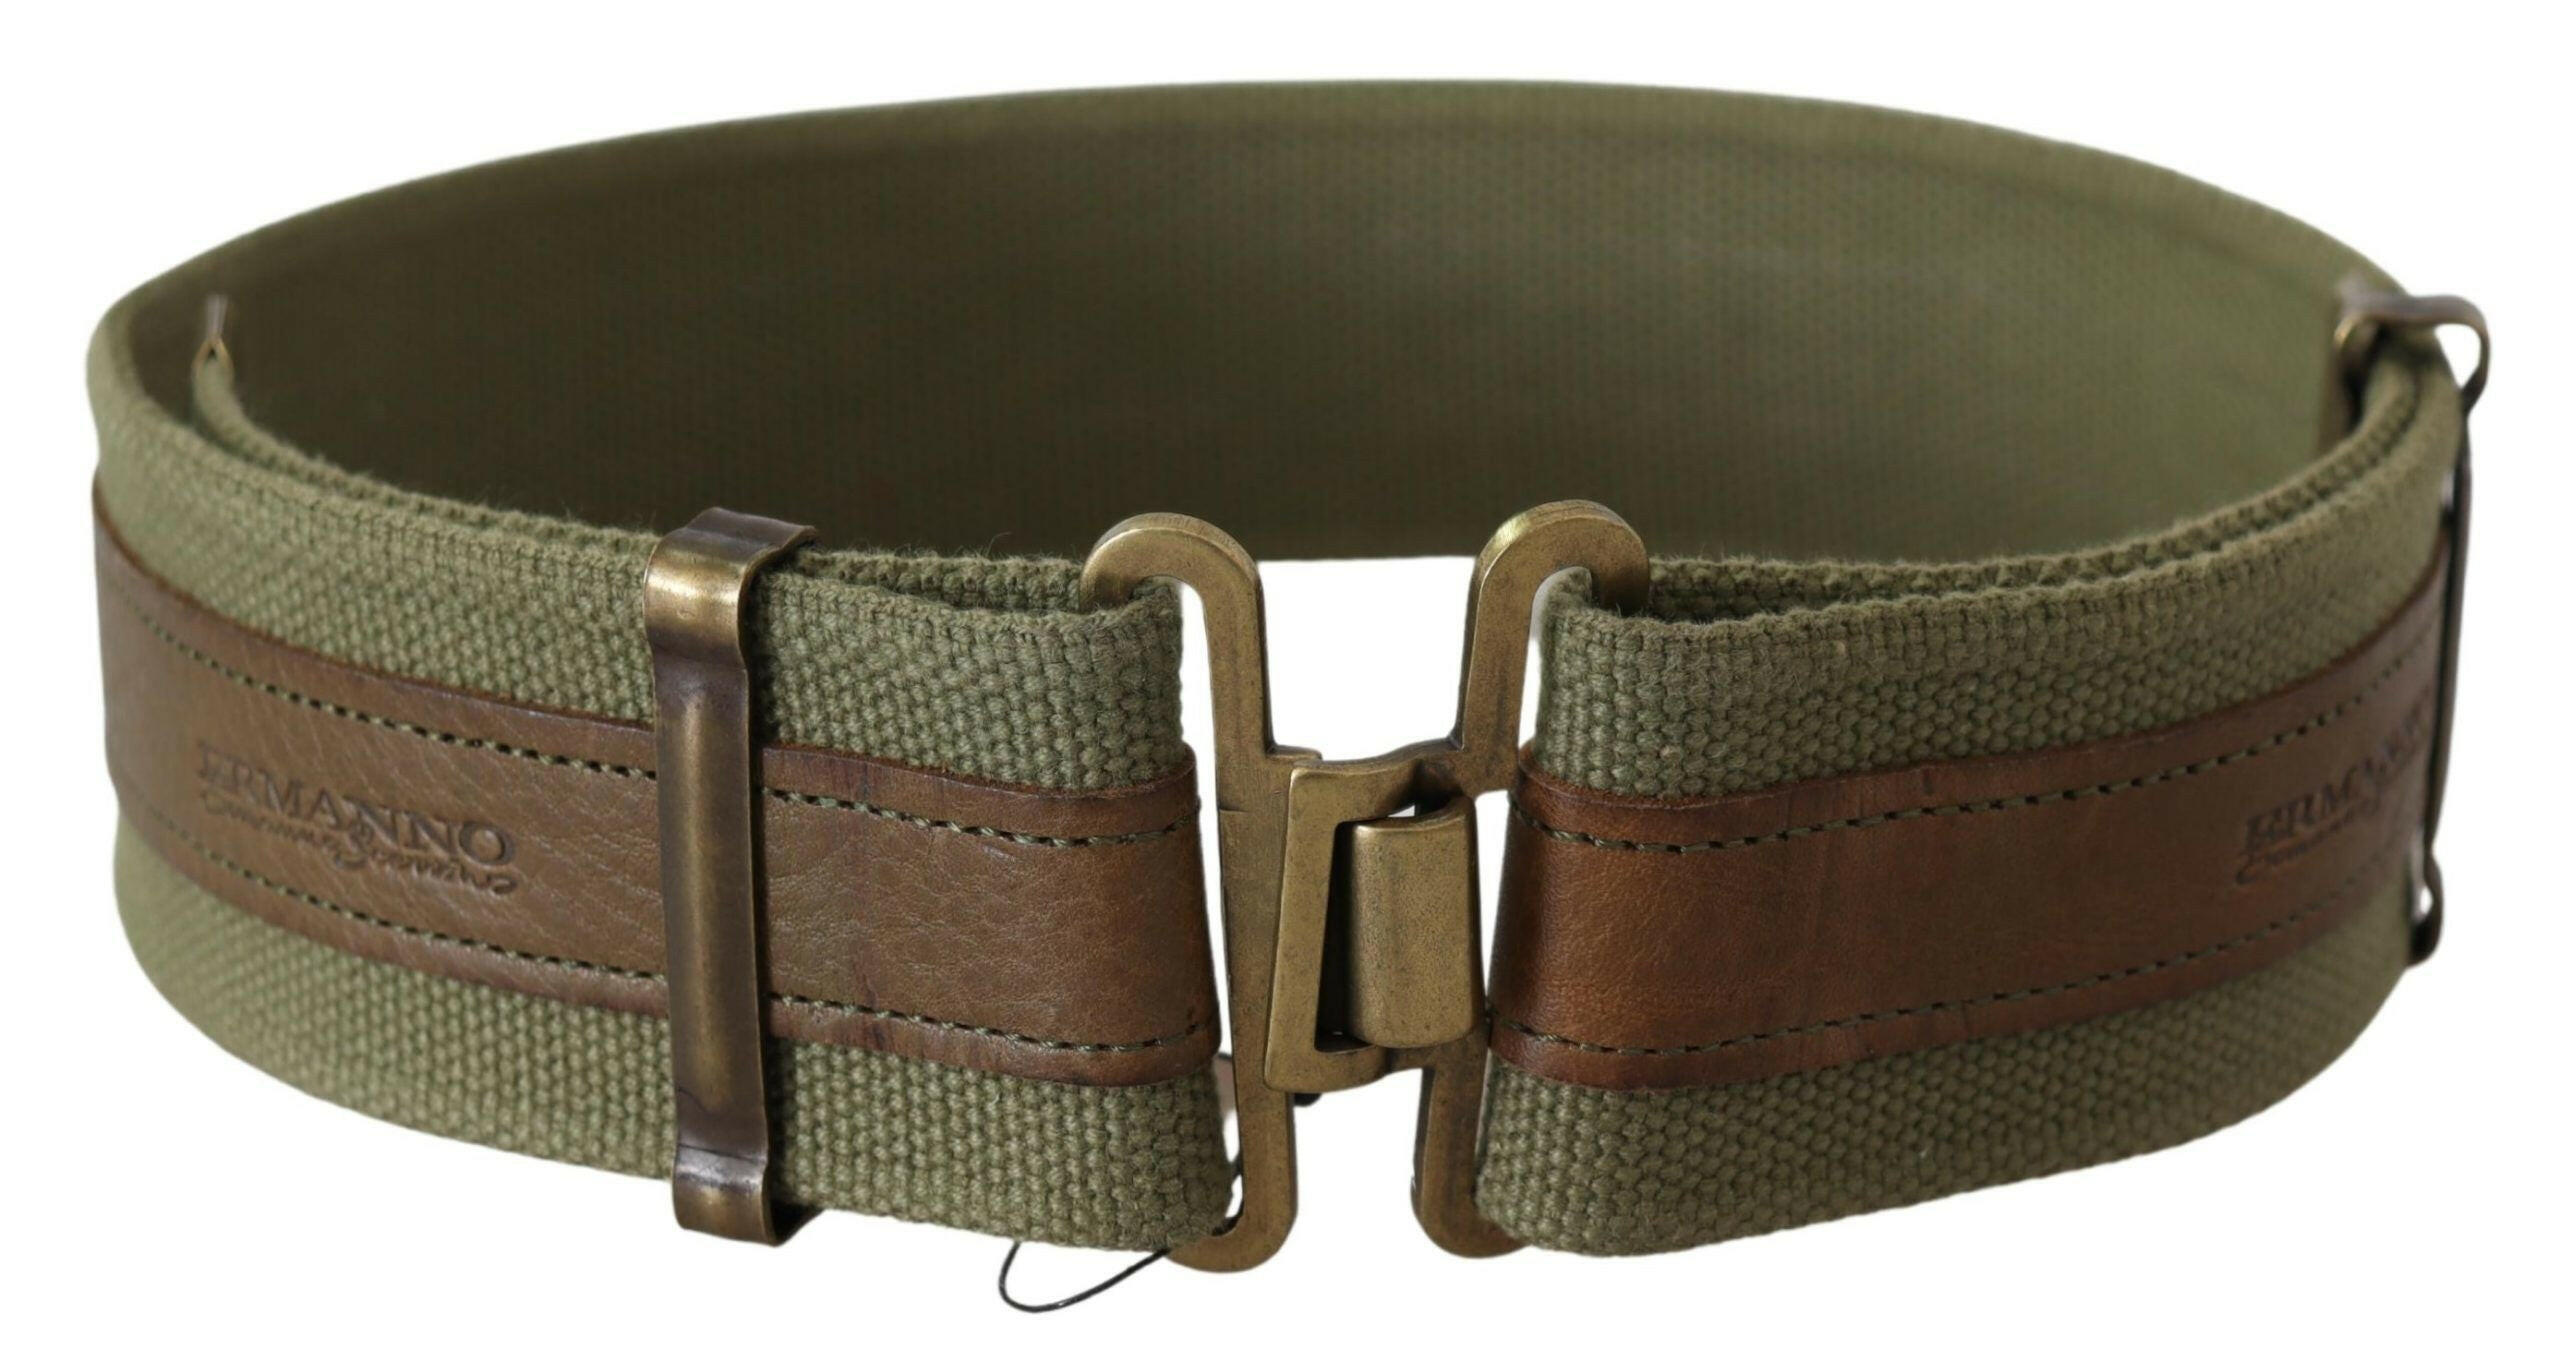 Ermanno Scervino Green Leather Rustic Bronze Buckle Army Belt - GENUINE AUTHENTIC BRAND LLC  